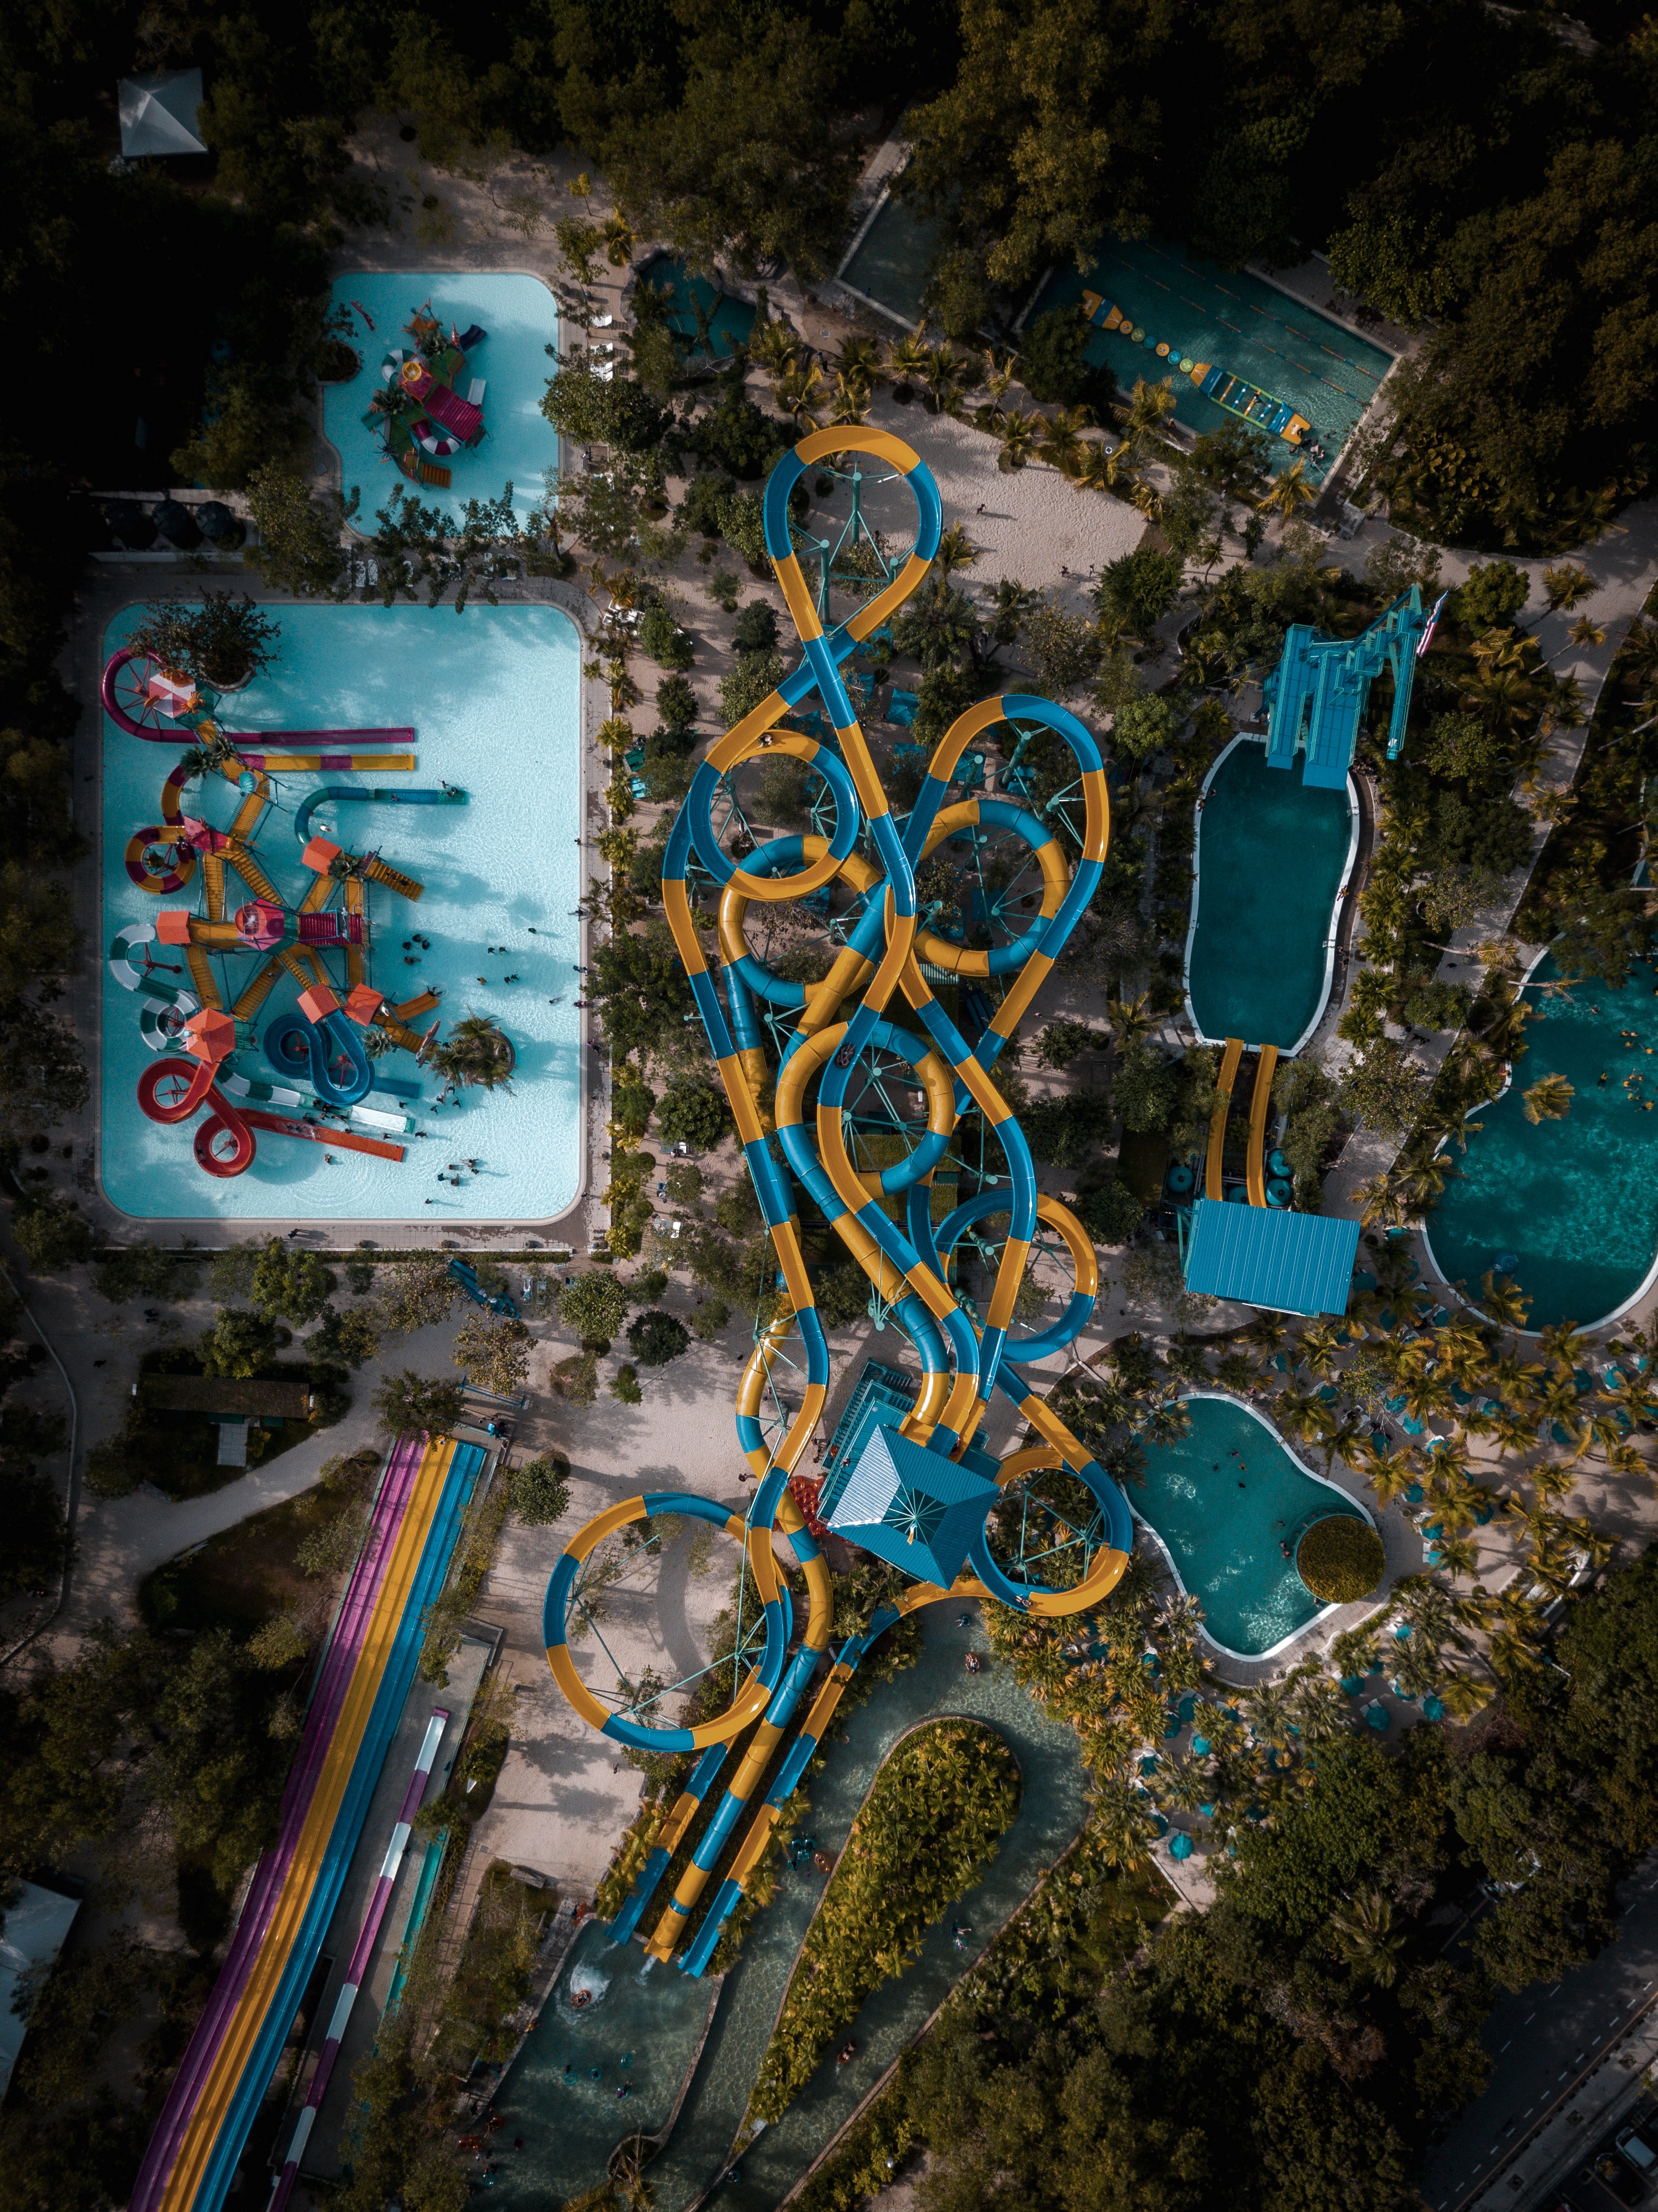 entertainment, view from above, miscellanea, miscellaneous, pool, aquapark, waterpark, slides UHD